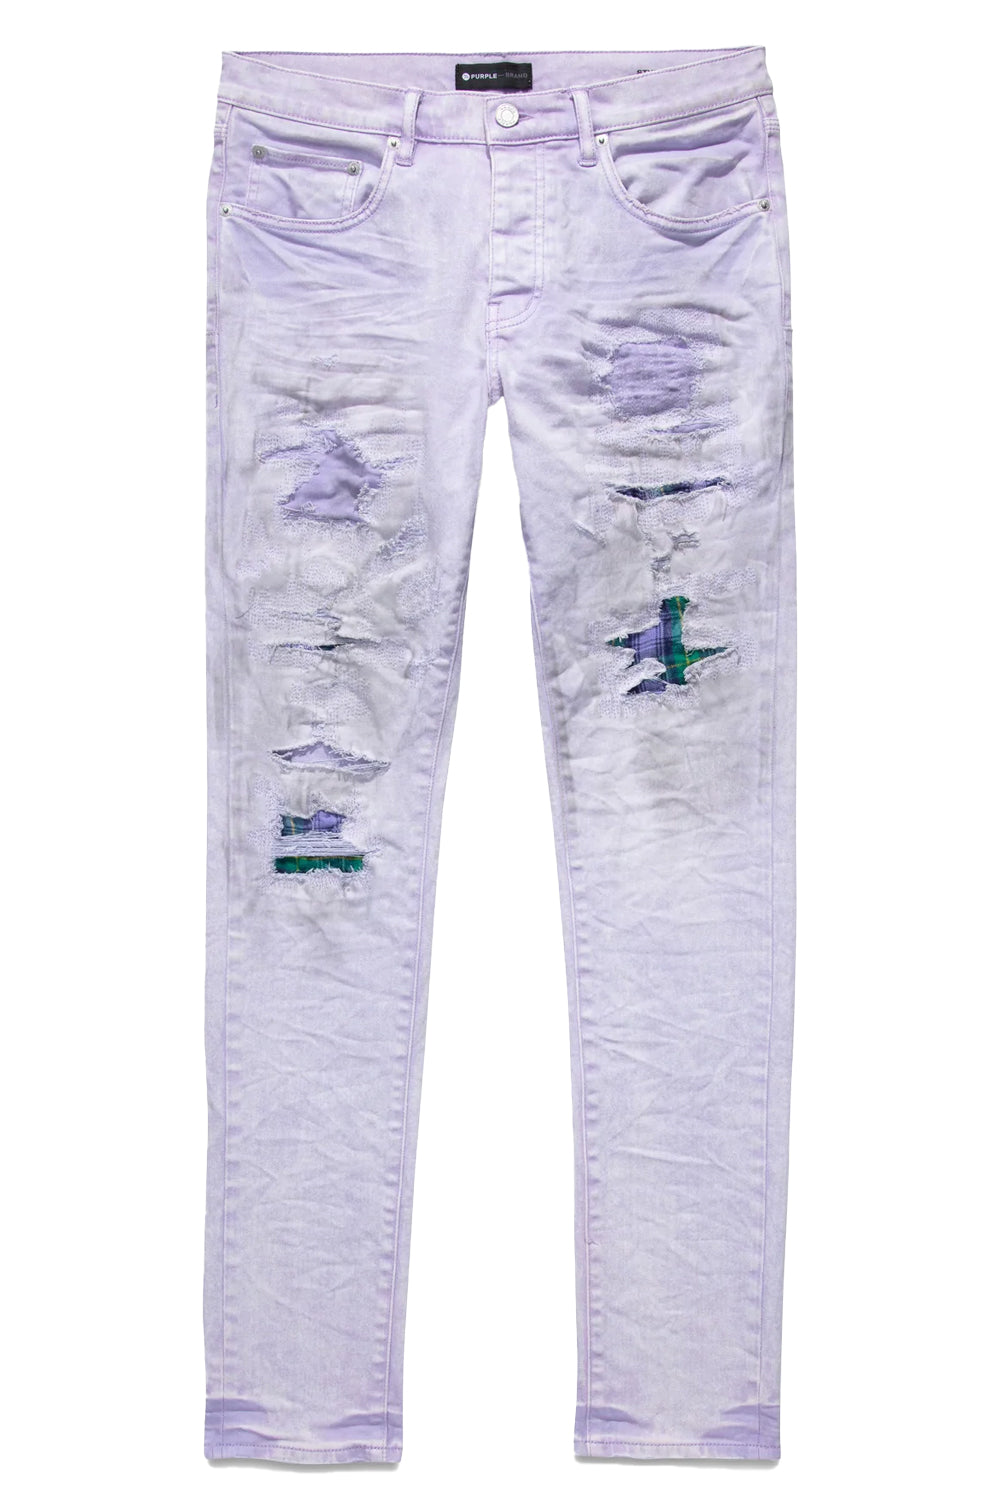 Purple Brand Jeans White Heavy Repair With Plaid Patch P001-WRPP223 –  Emergency Clothing Store